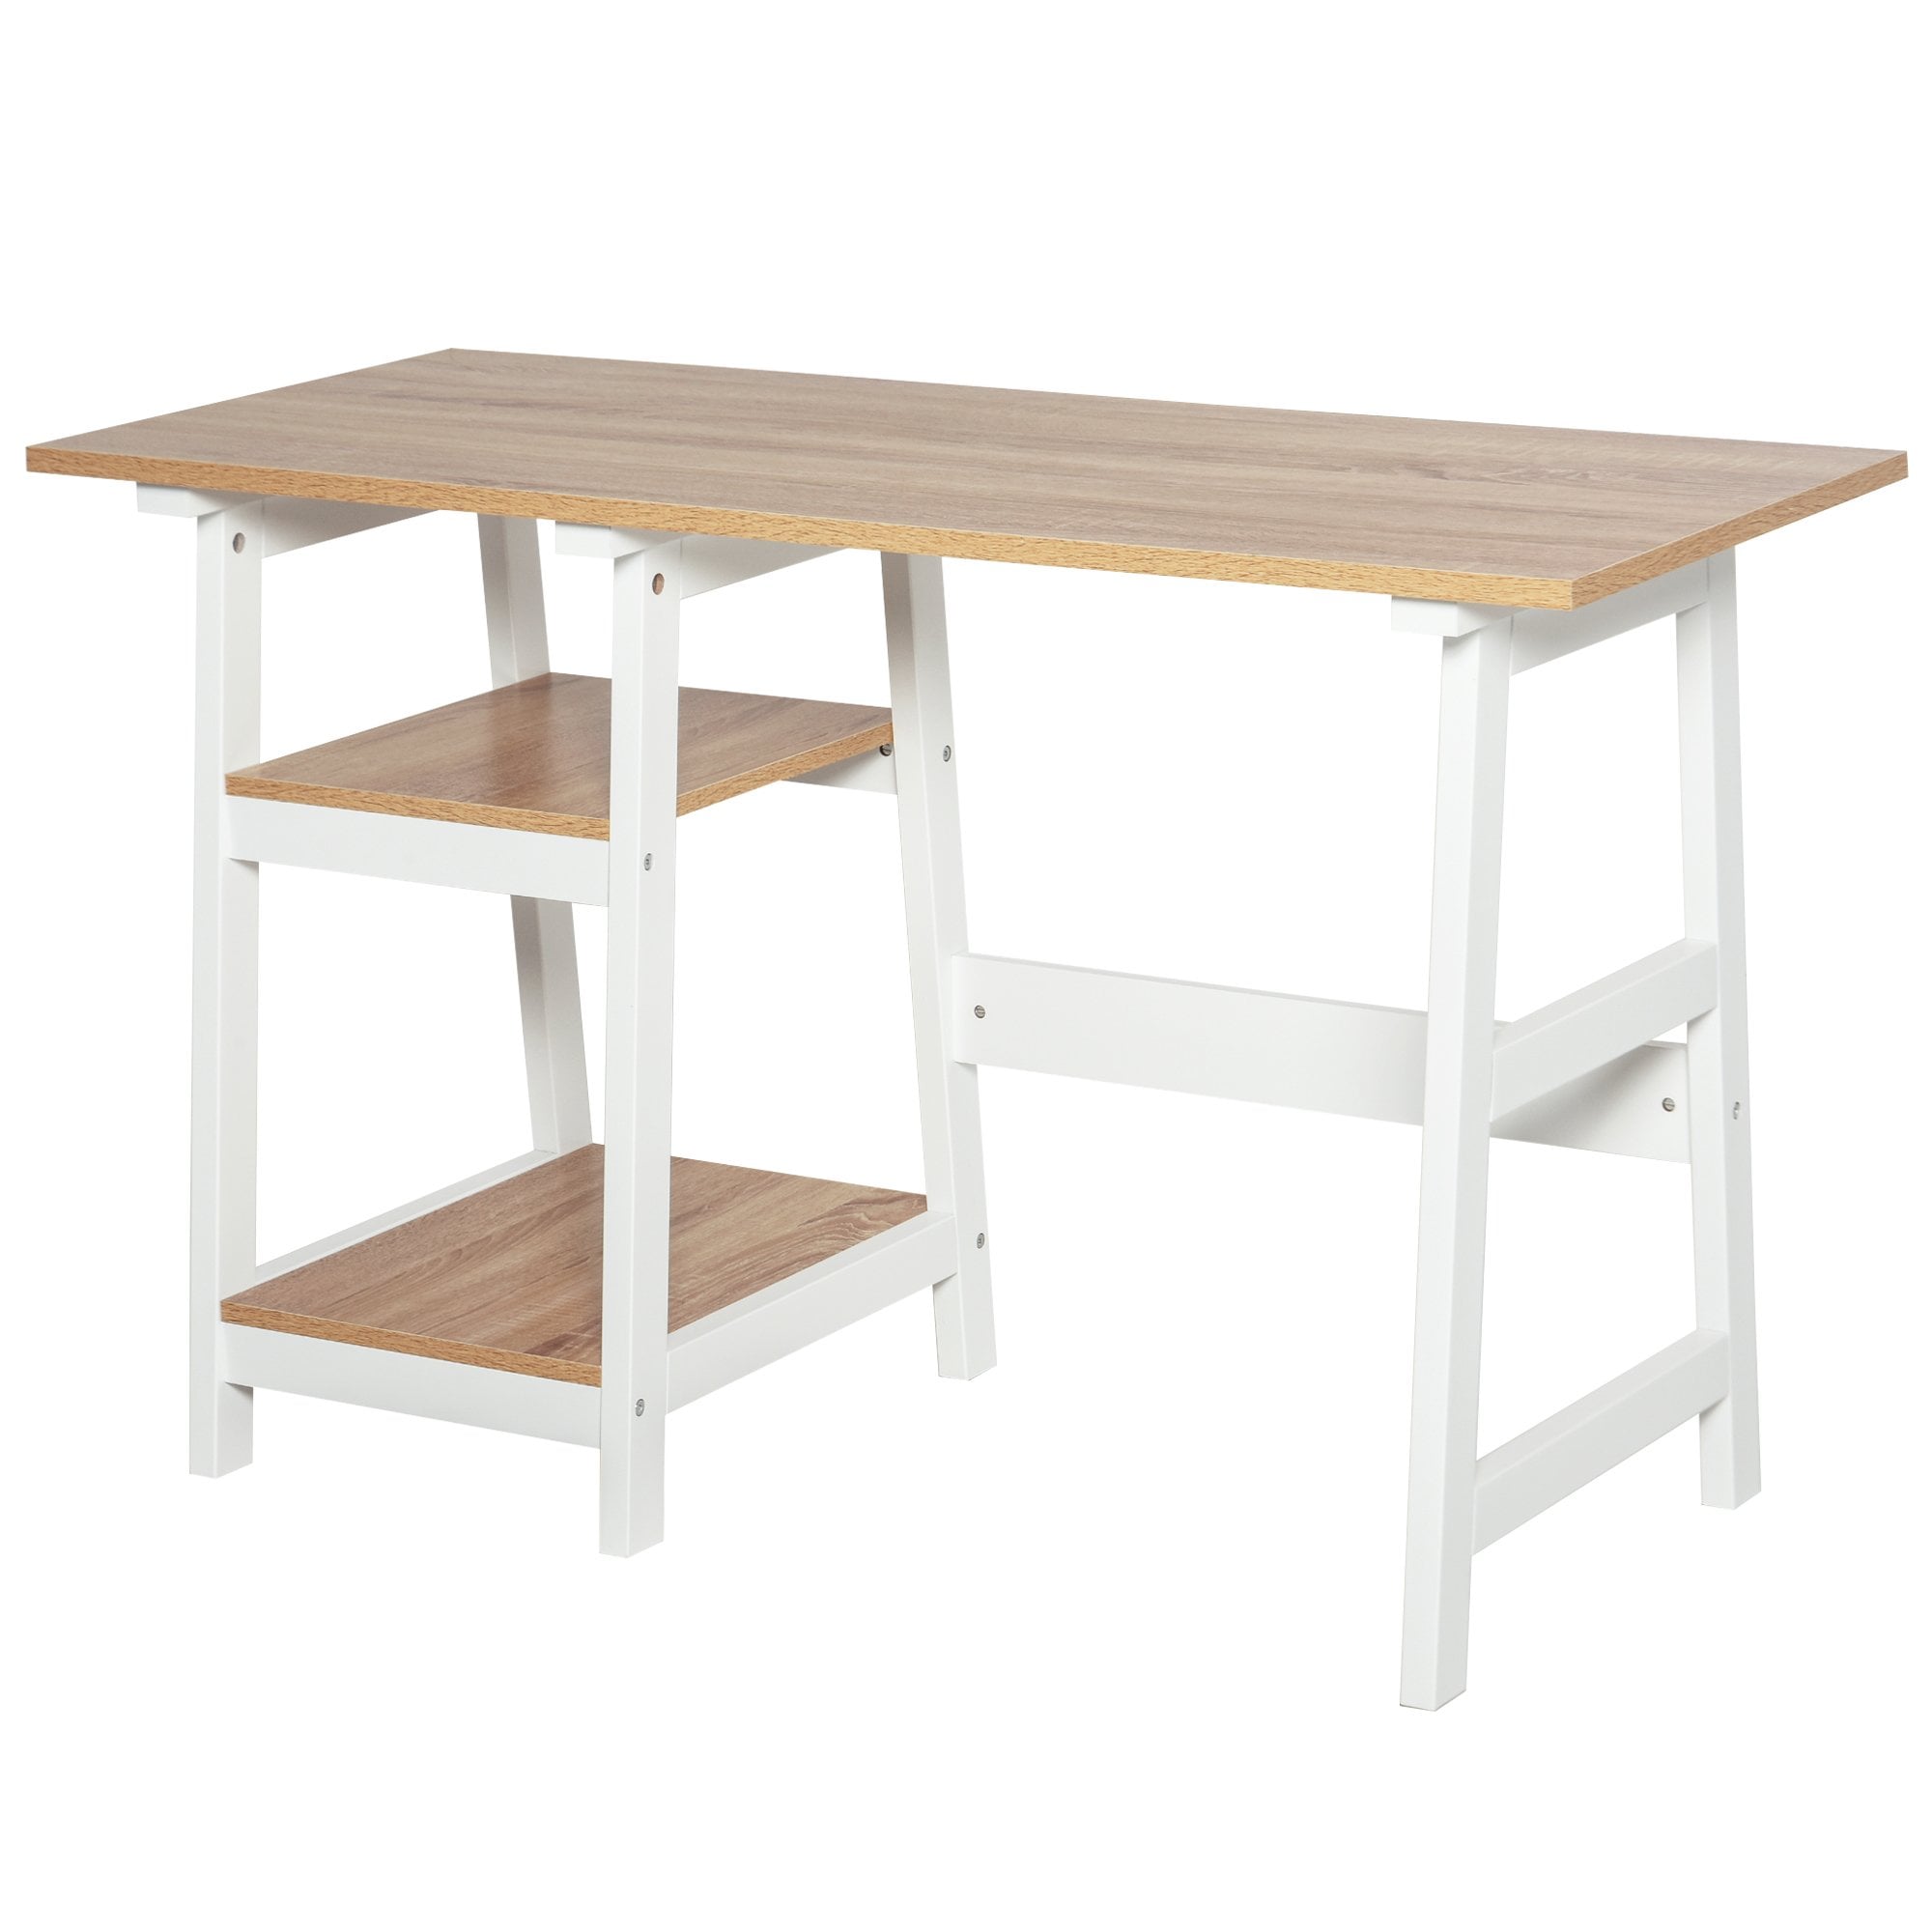 Compact Computer Desk with Shelf Writing Table Workstation for Home Office - Study - Natural Wood Color w/ Office - CARTER  | TJ Hughes